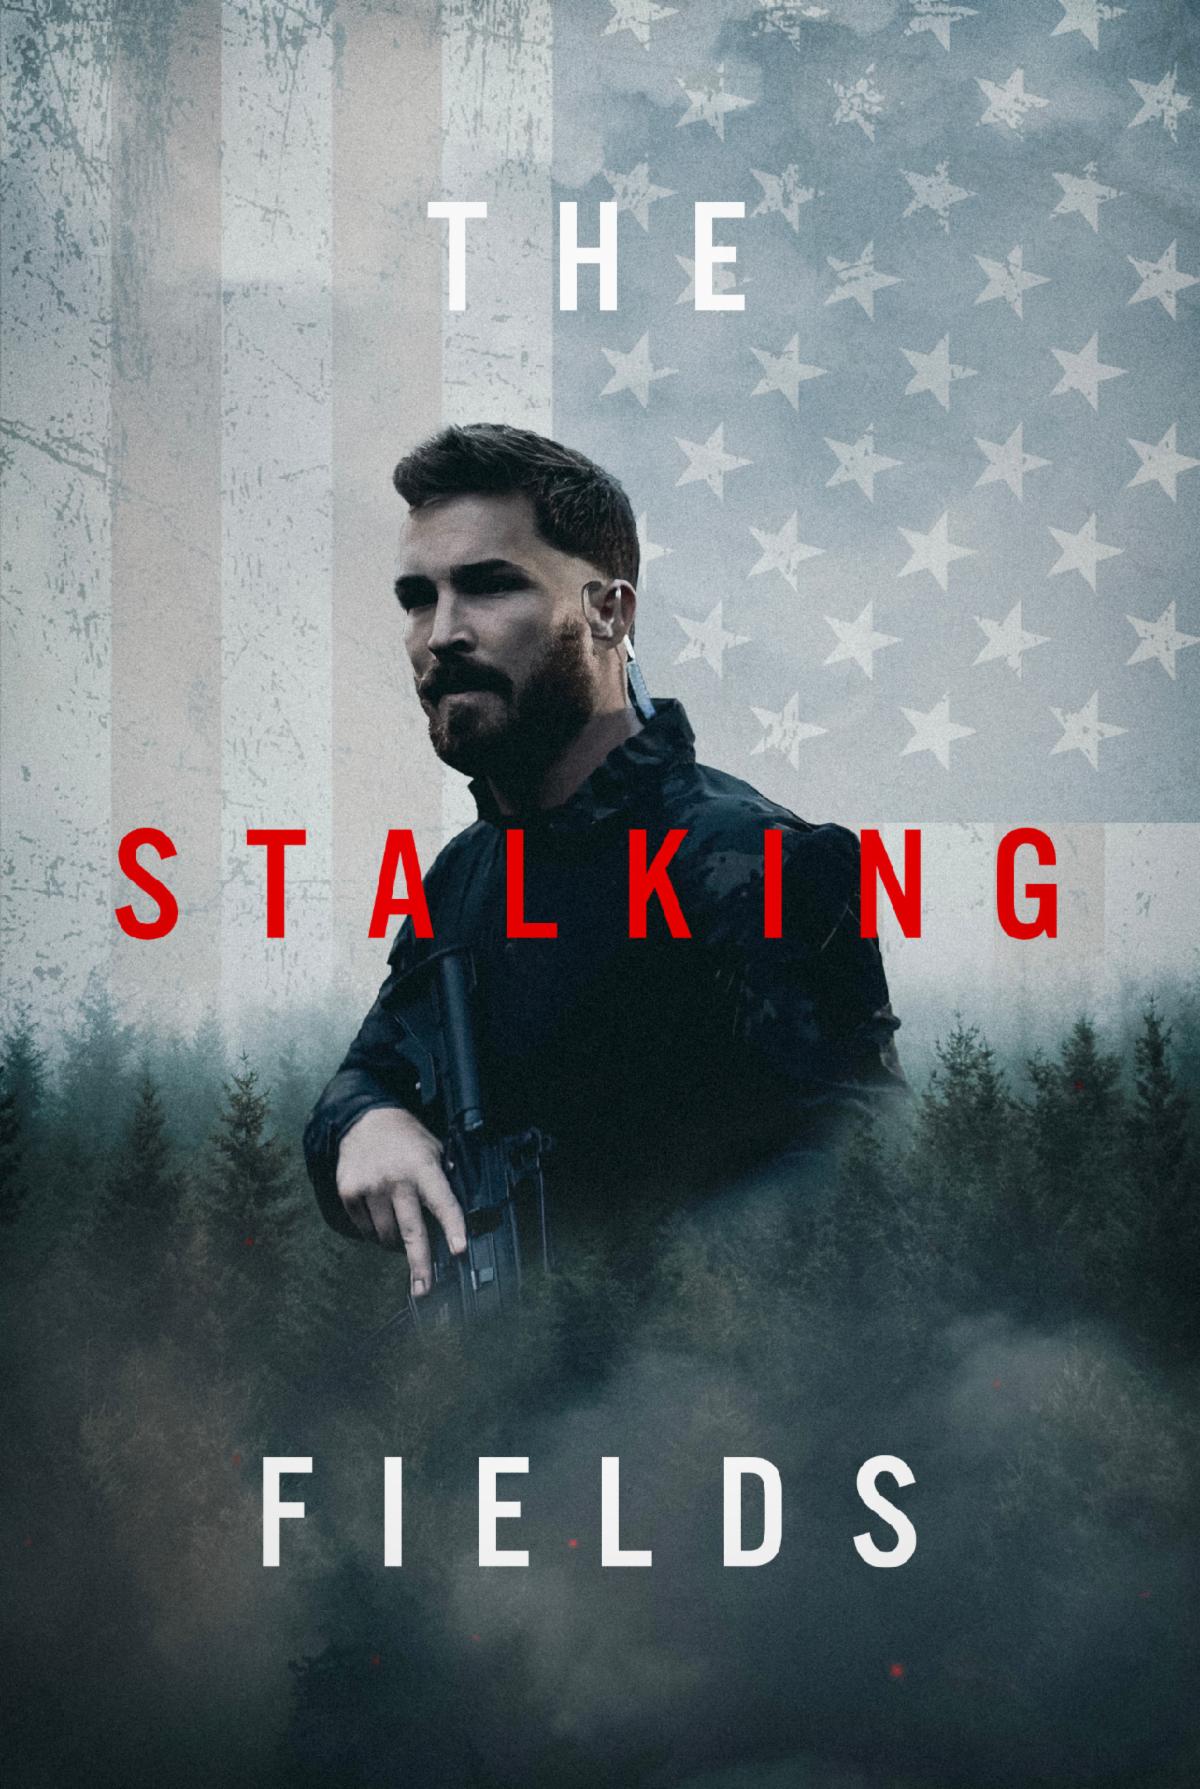 The Stalking Fields – A High Stakes Action Thriller – OPENING ON DIGITAL PLATFORMS ON JANUARY 17